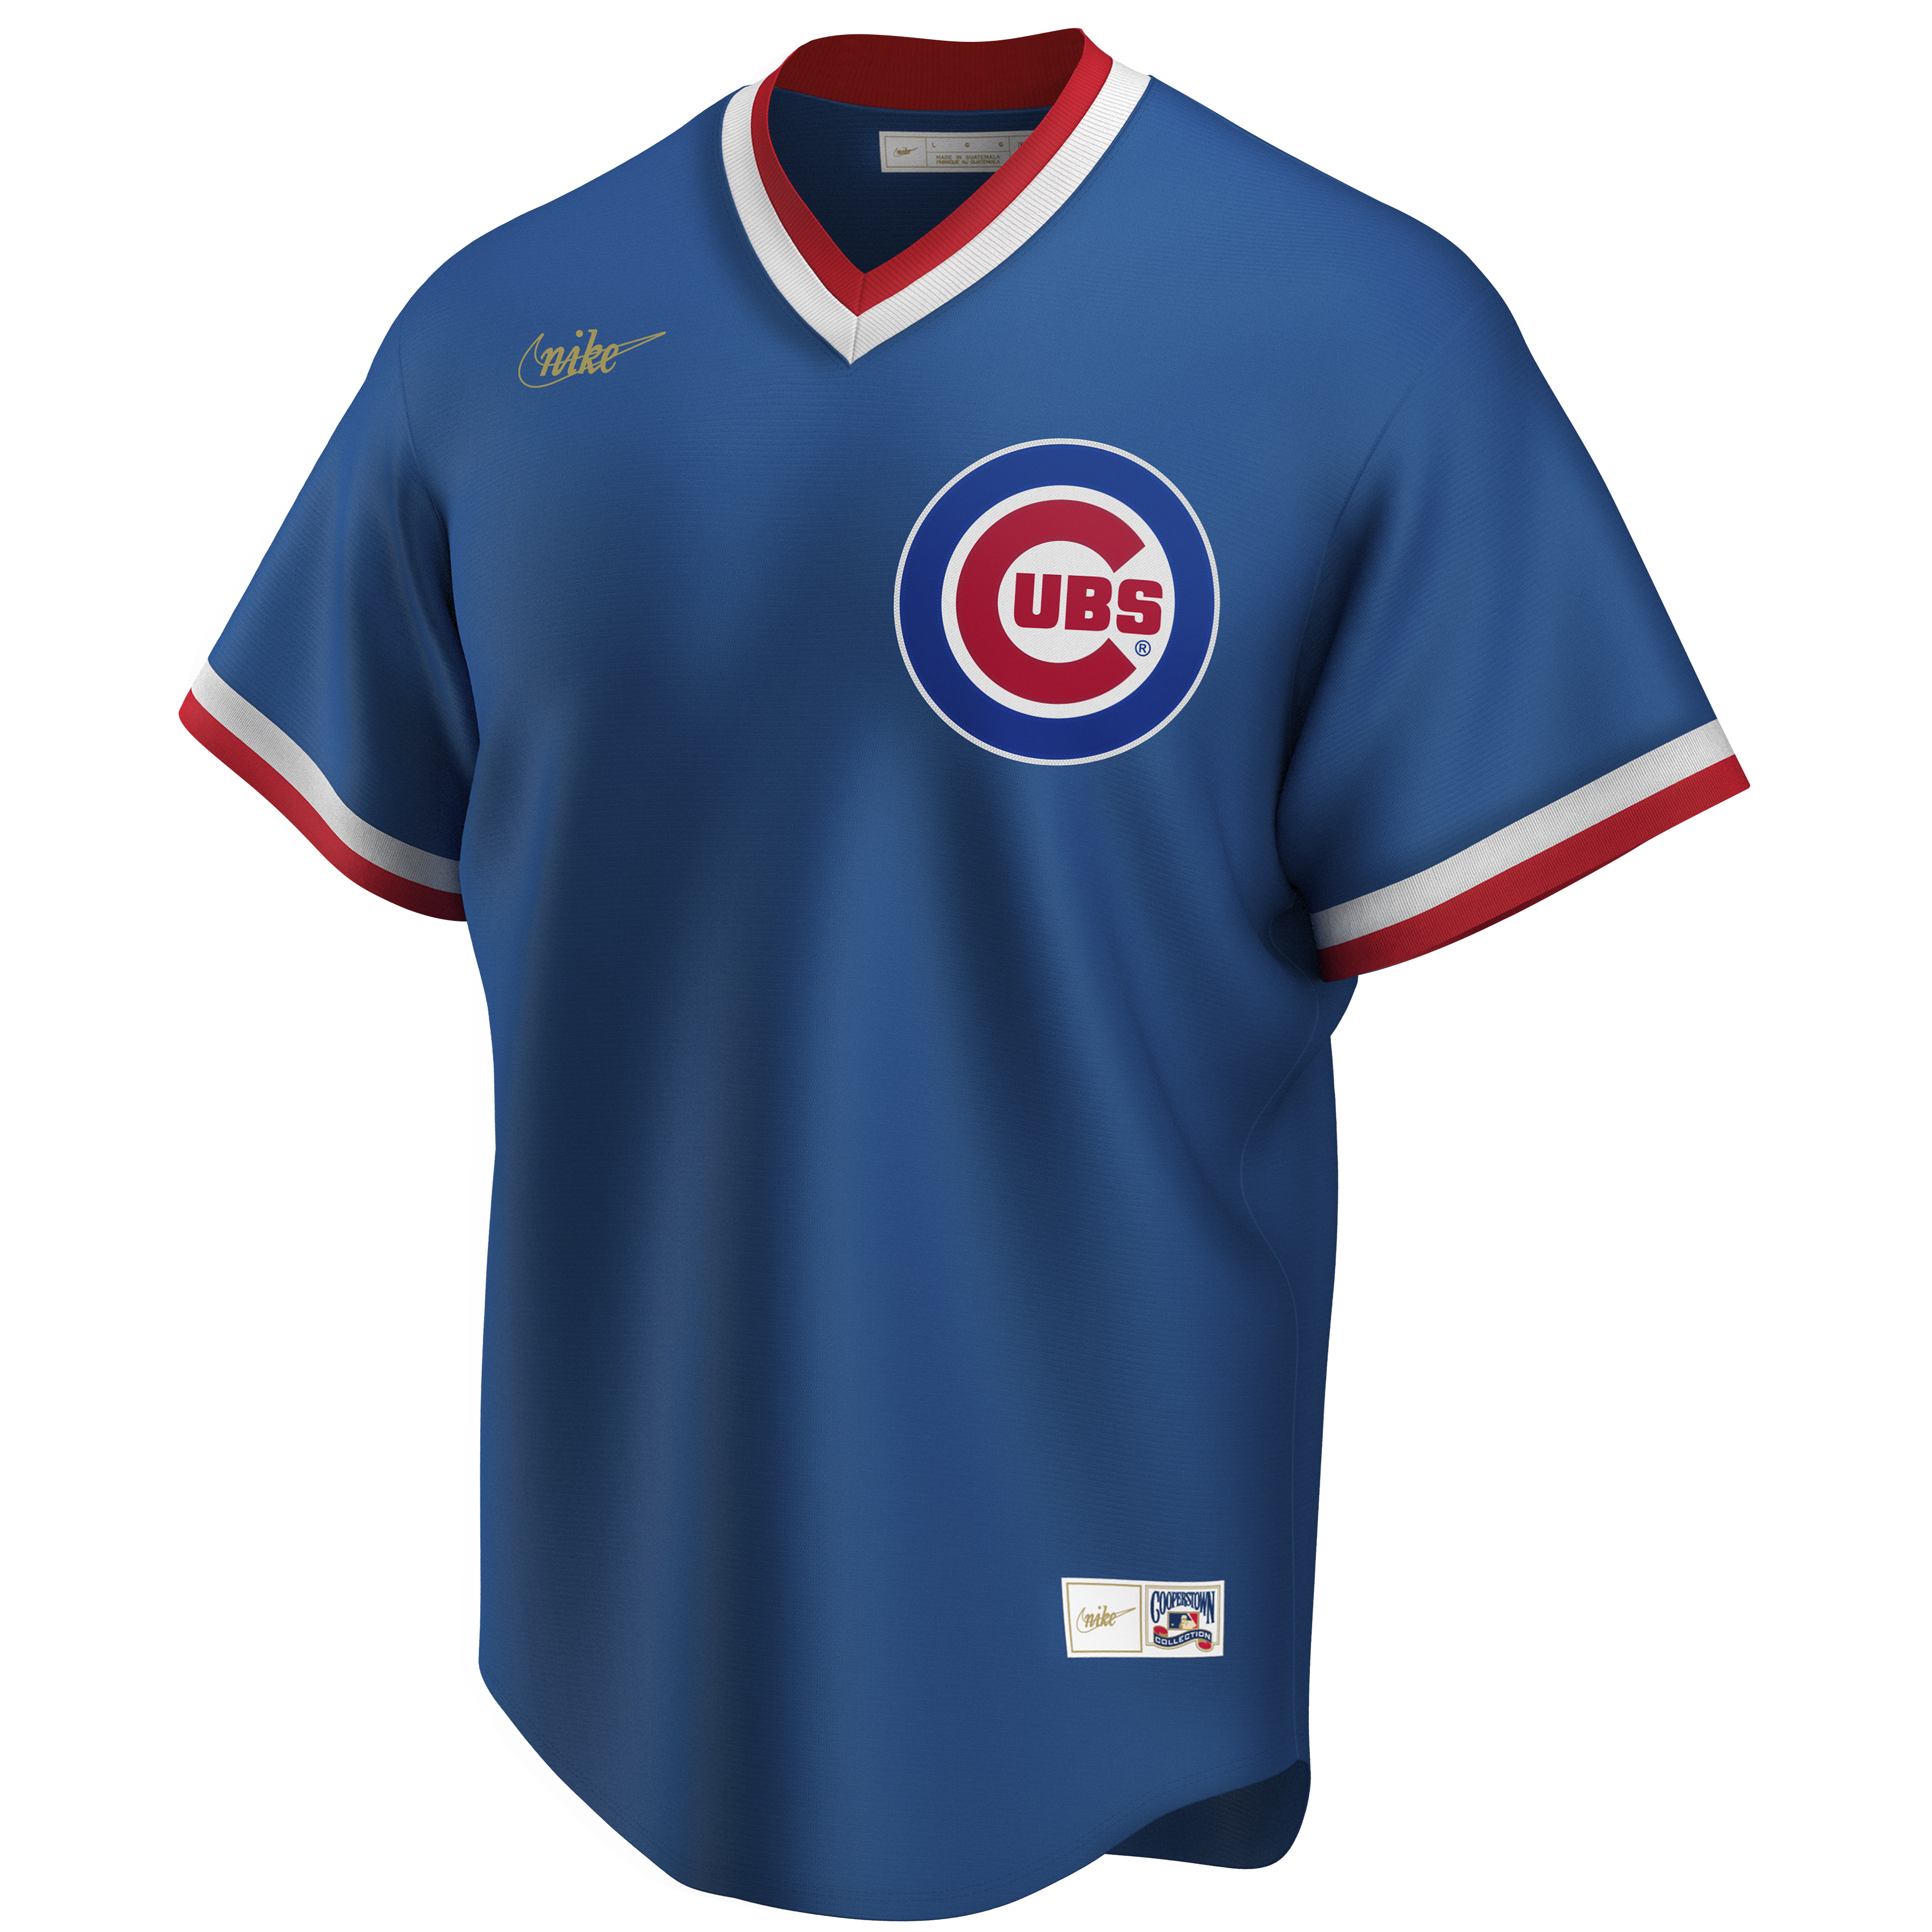 Sammy Sosa Chicago Cubs Field of Dreams Jersey by NIKE